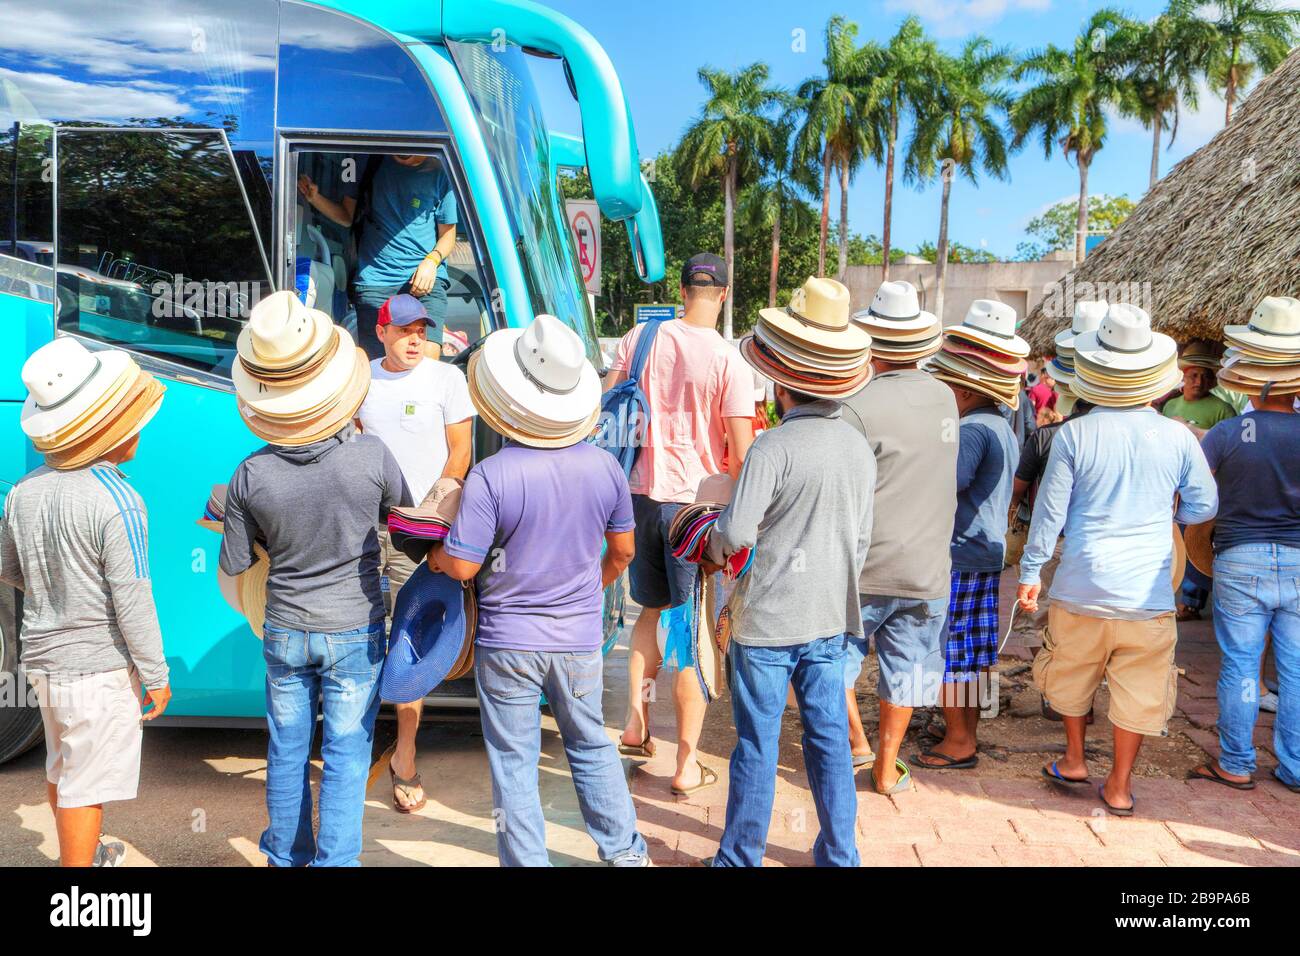 Chichen Itza, Mexico - Dec. 23, 2019: Tourists stepping out of a tour bus to visit Chichen Itza, the largest archaeological city of the pre-Columbian Stock Photo